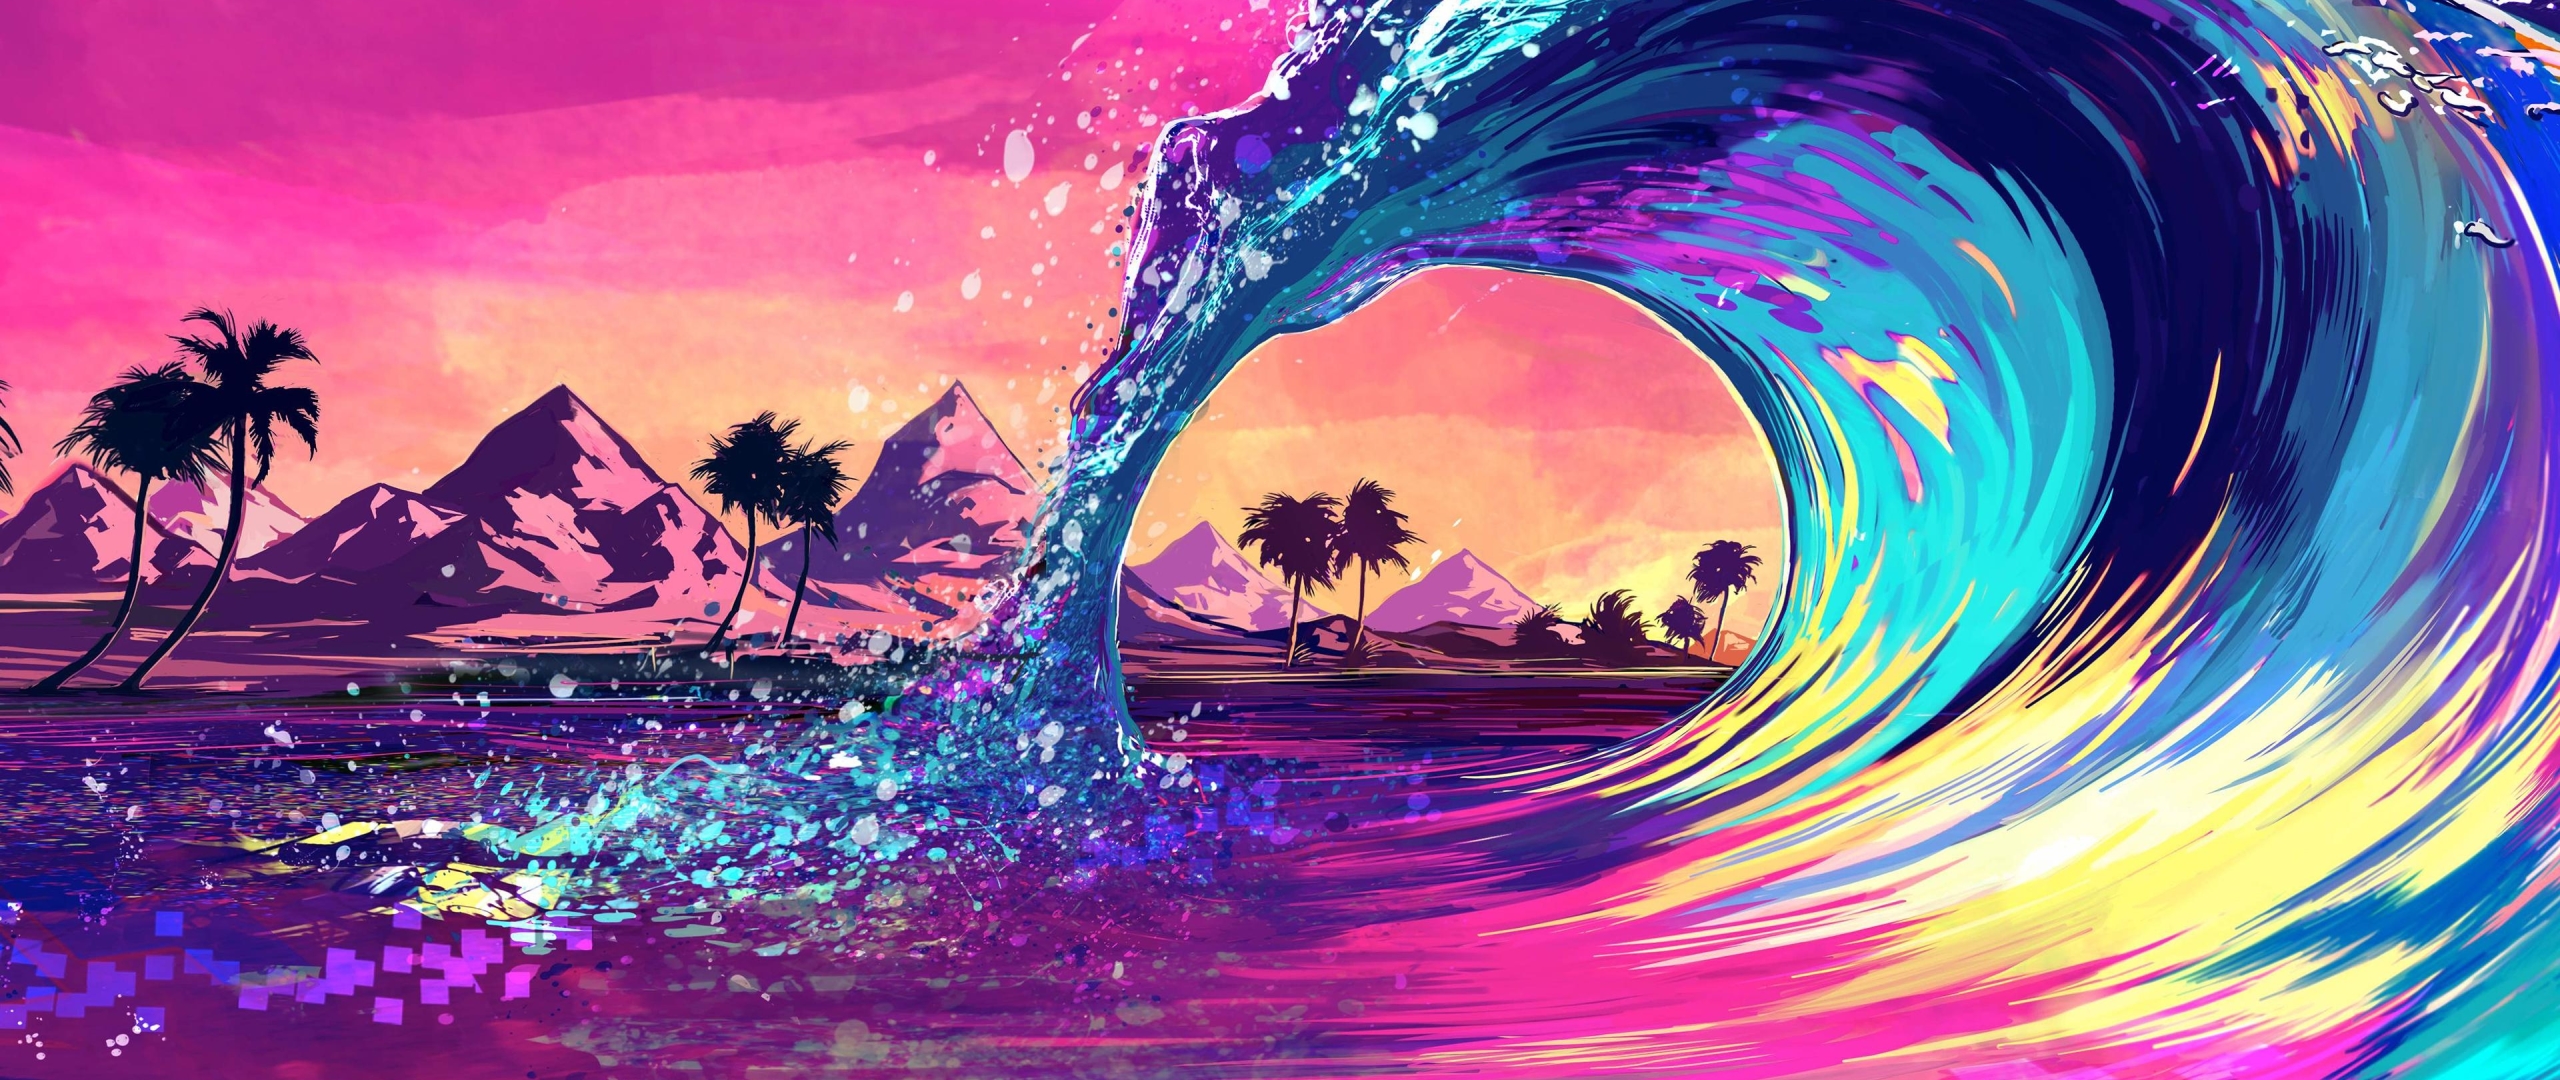 Retro Wave Ocean Wallpaper Hd Artist K Wallpapers Images Photos And ...